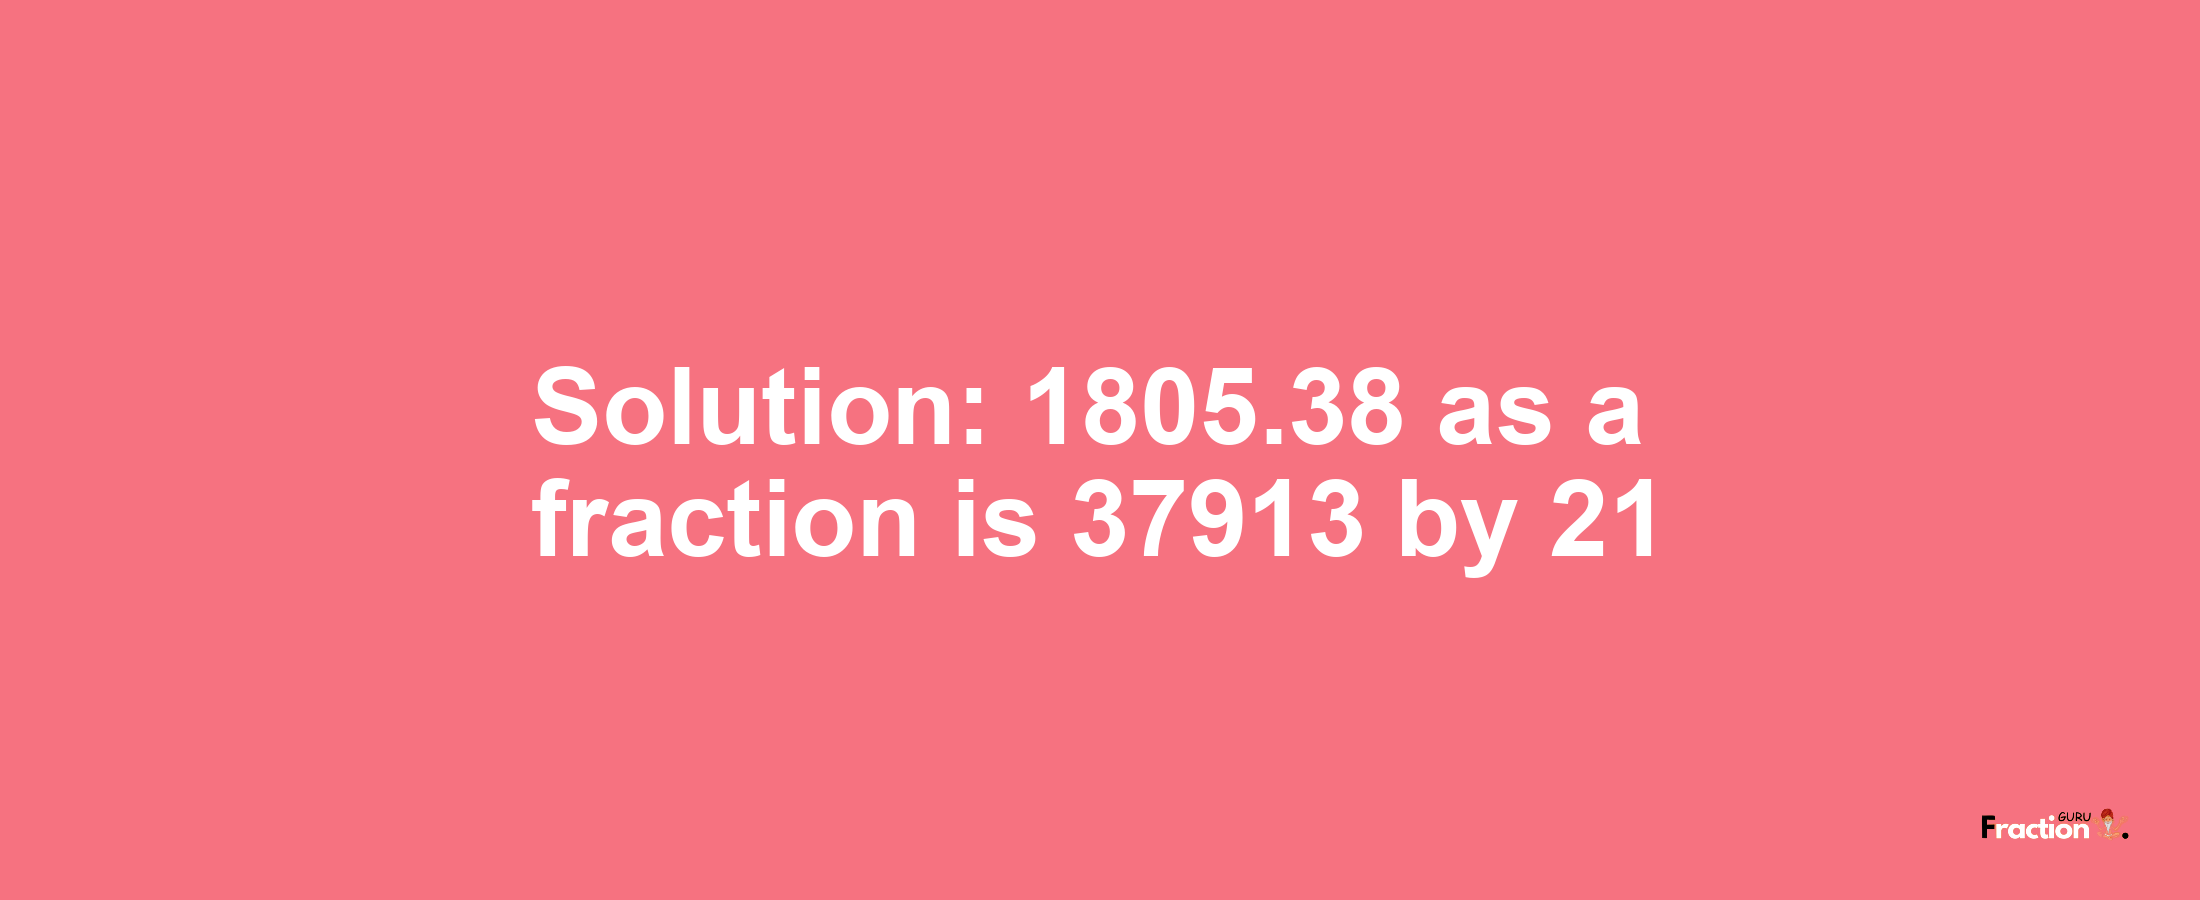 Solution:1805.38 as a fraction is 37913/21